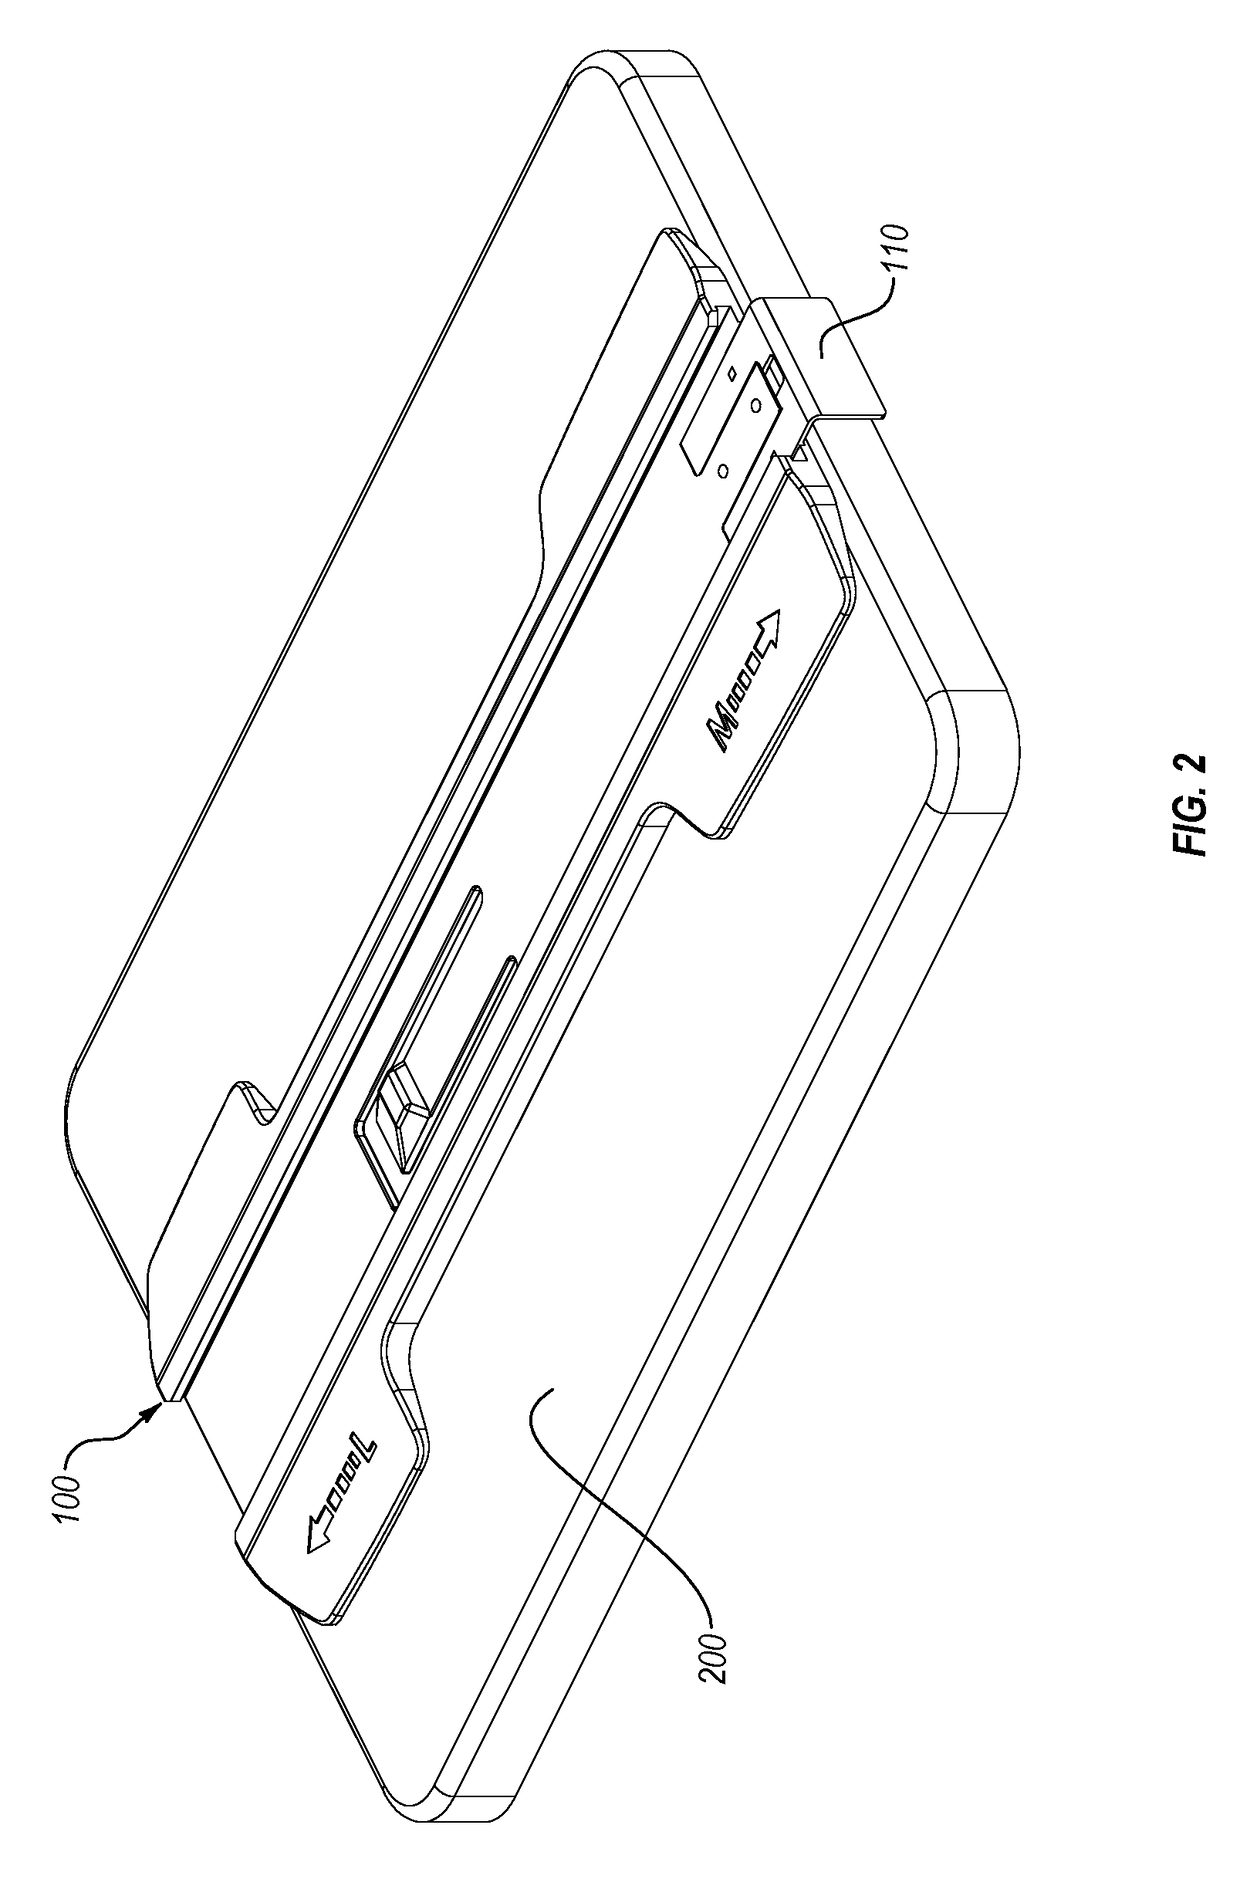 Devices, systems, and methods to support, stabilize, and position a medical device